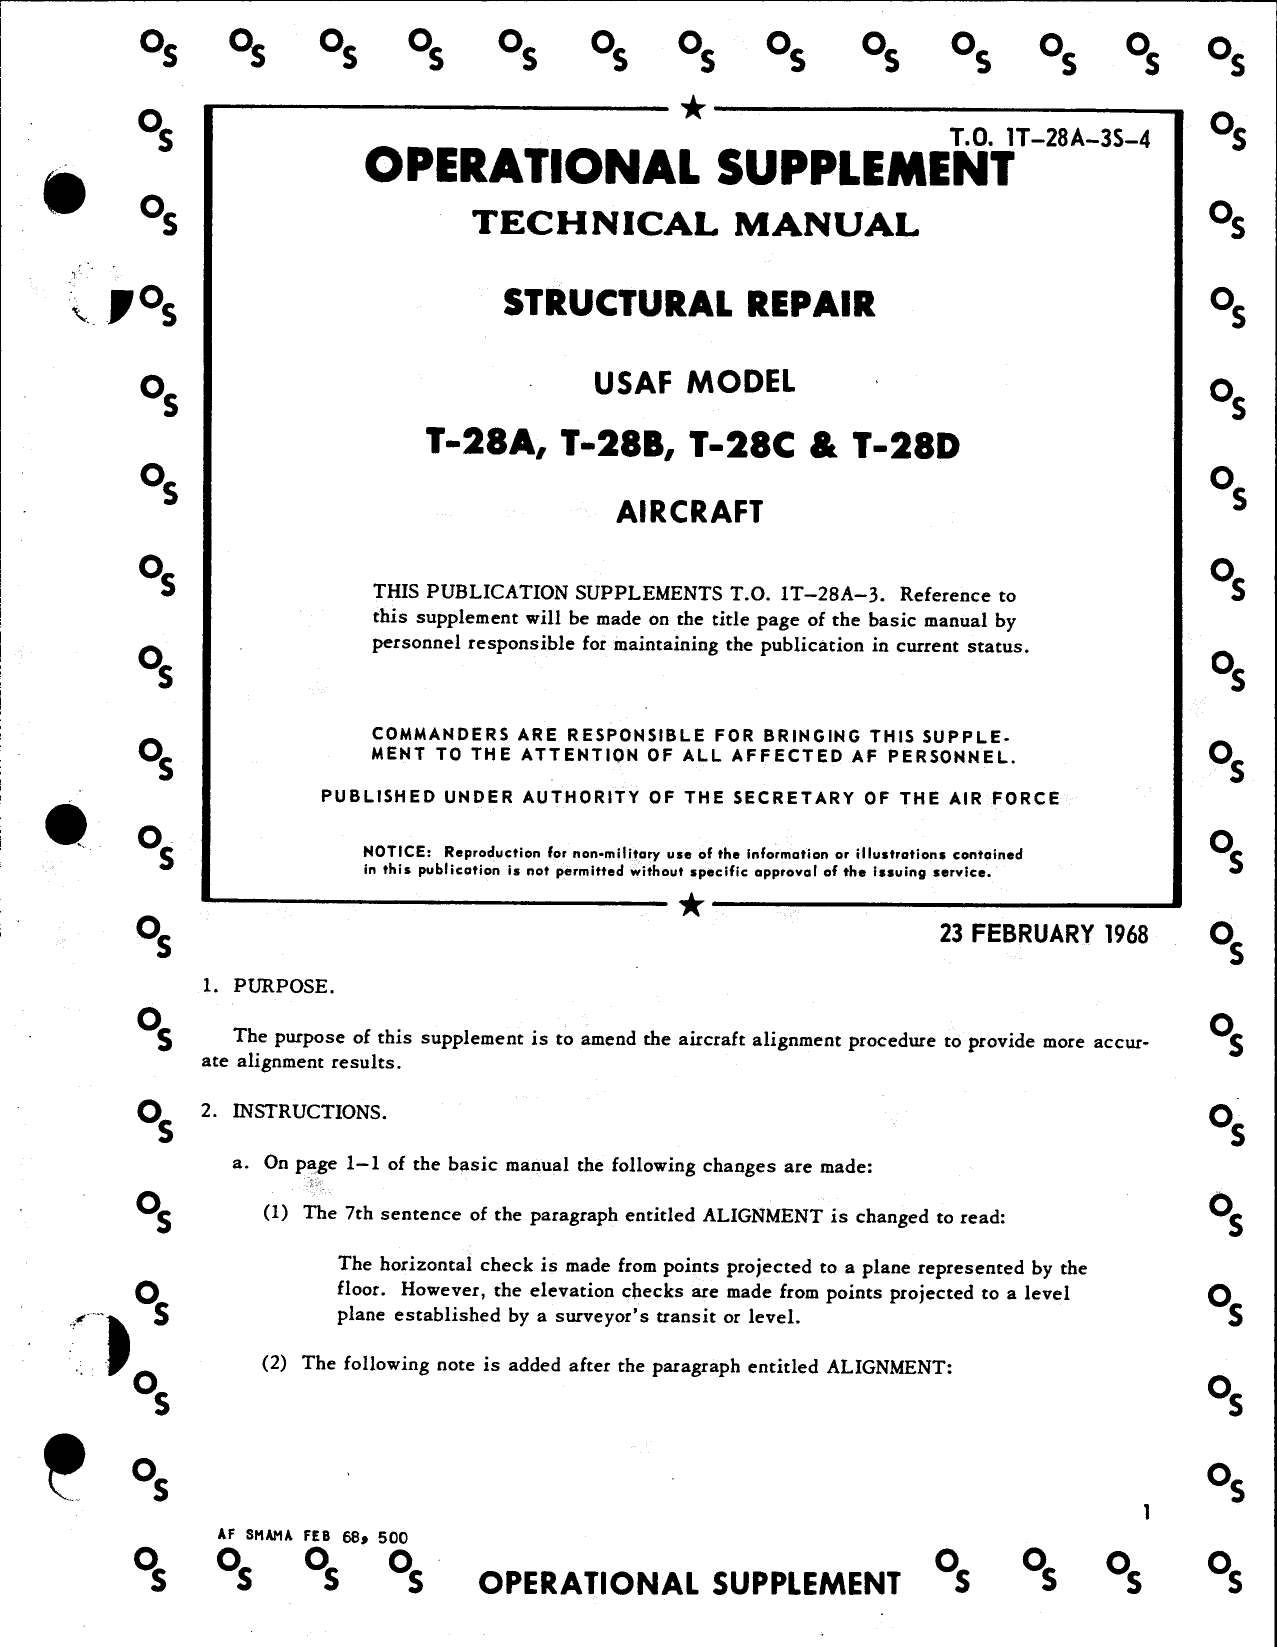 Sample page  7 from AirCorps Library document: Safety Supplement Structural Repair Tech Manual, T-28A T-28B T-28C T-28D